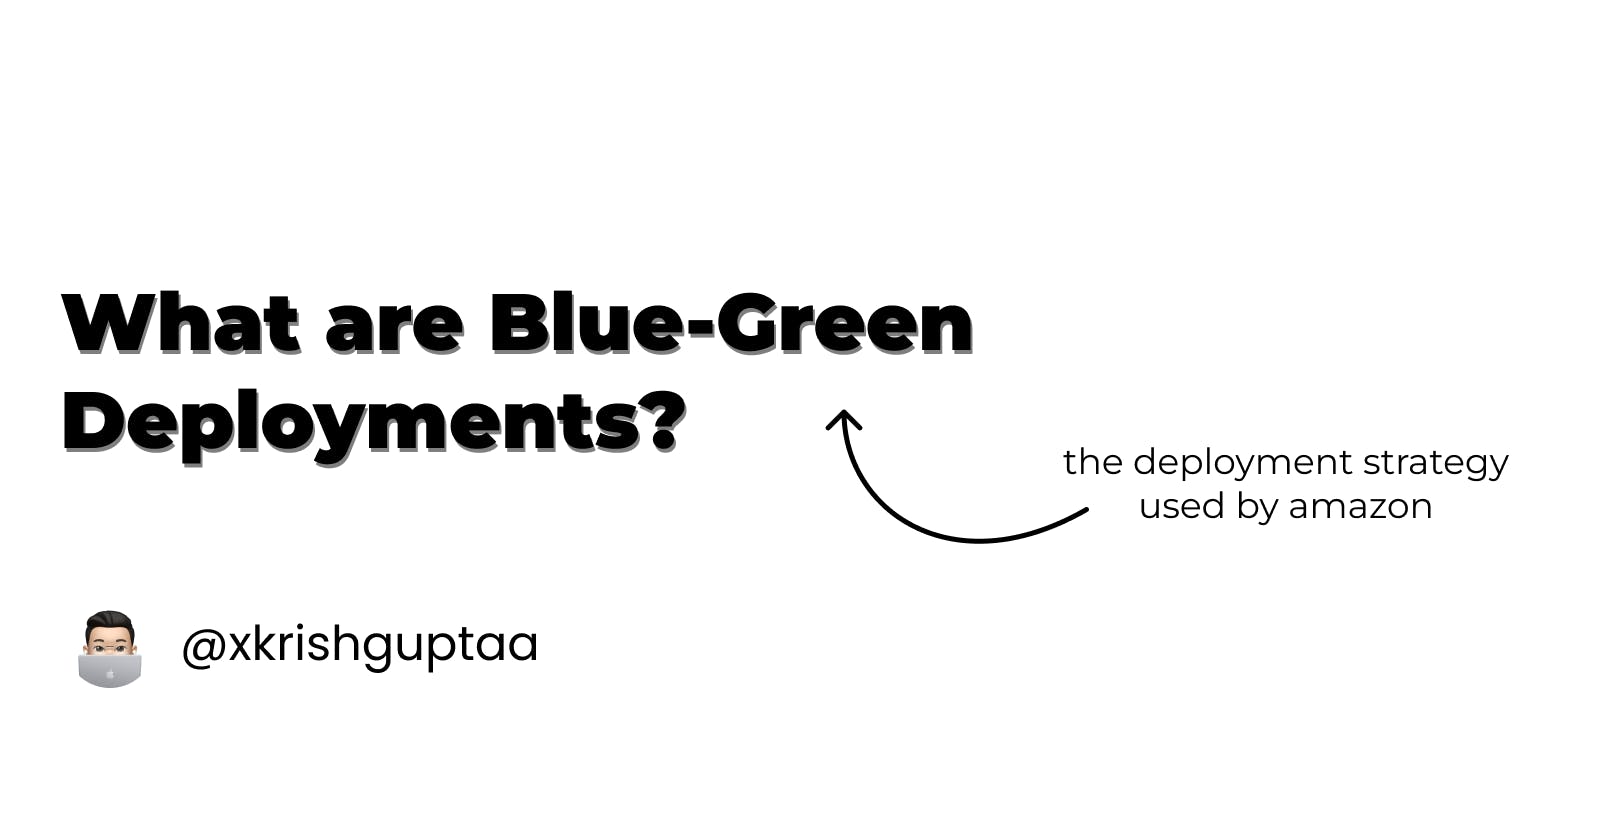 What are Blue-Green Deployments?